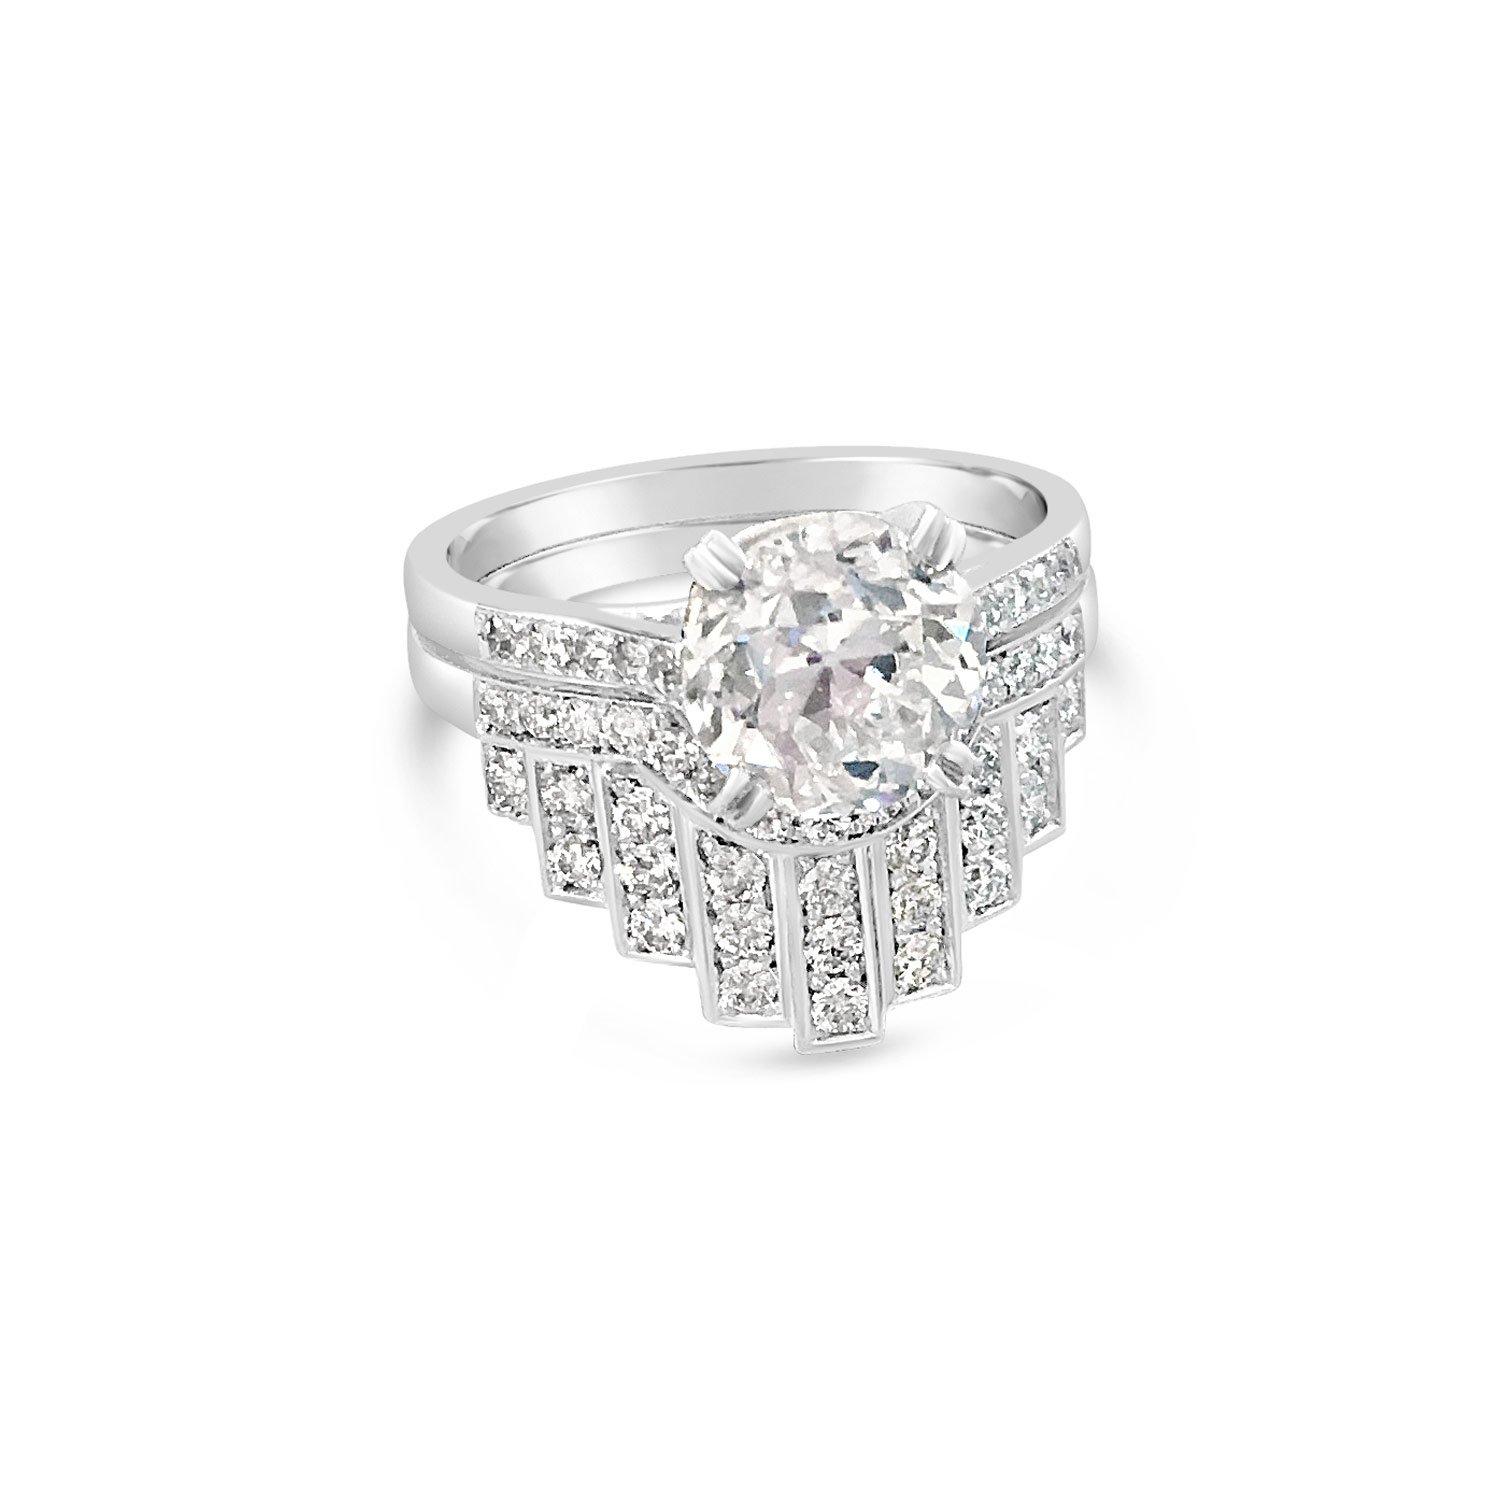 Bespoke fitted brilliant-cut diamond and platinum wedding ring front